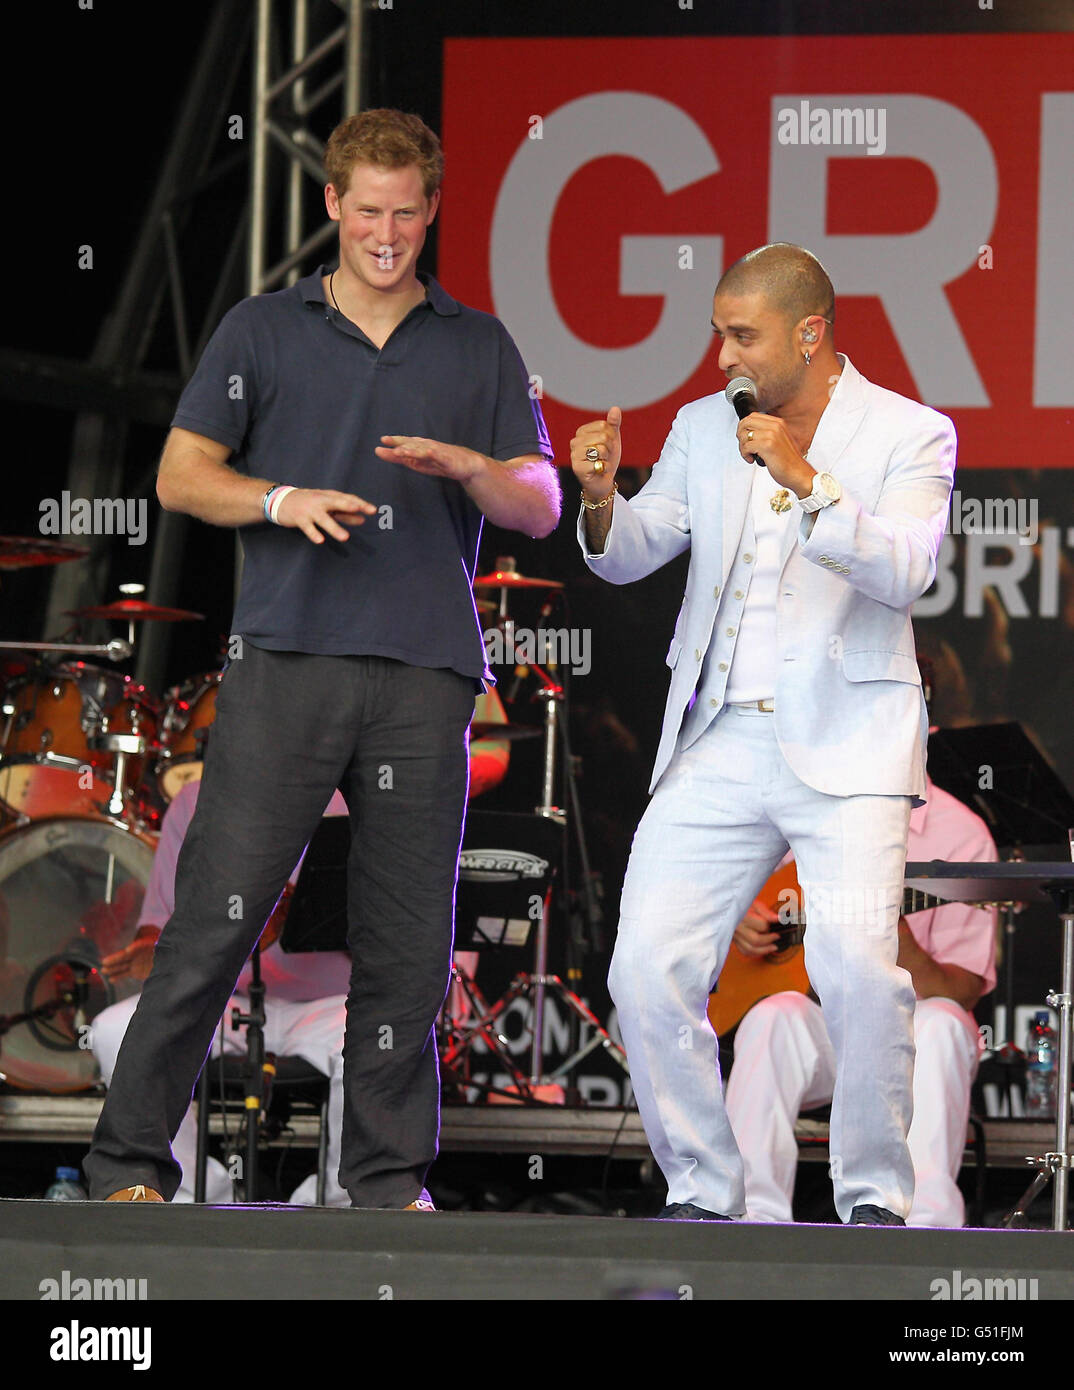 Prince Harry gets up on stage with Brazilian singer Diogo Nogueira during a GREAT event in the Favella of Complexo do Alemao in the northern suburb of Rio De Janeiro Brazil. Stock Photo